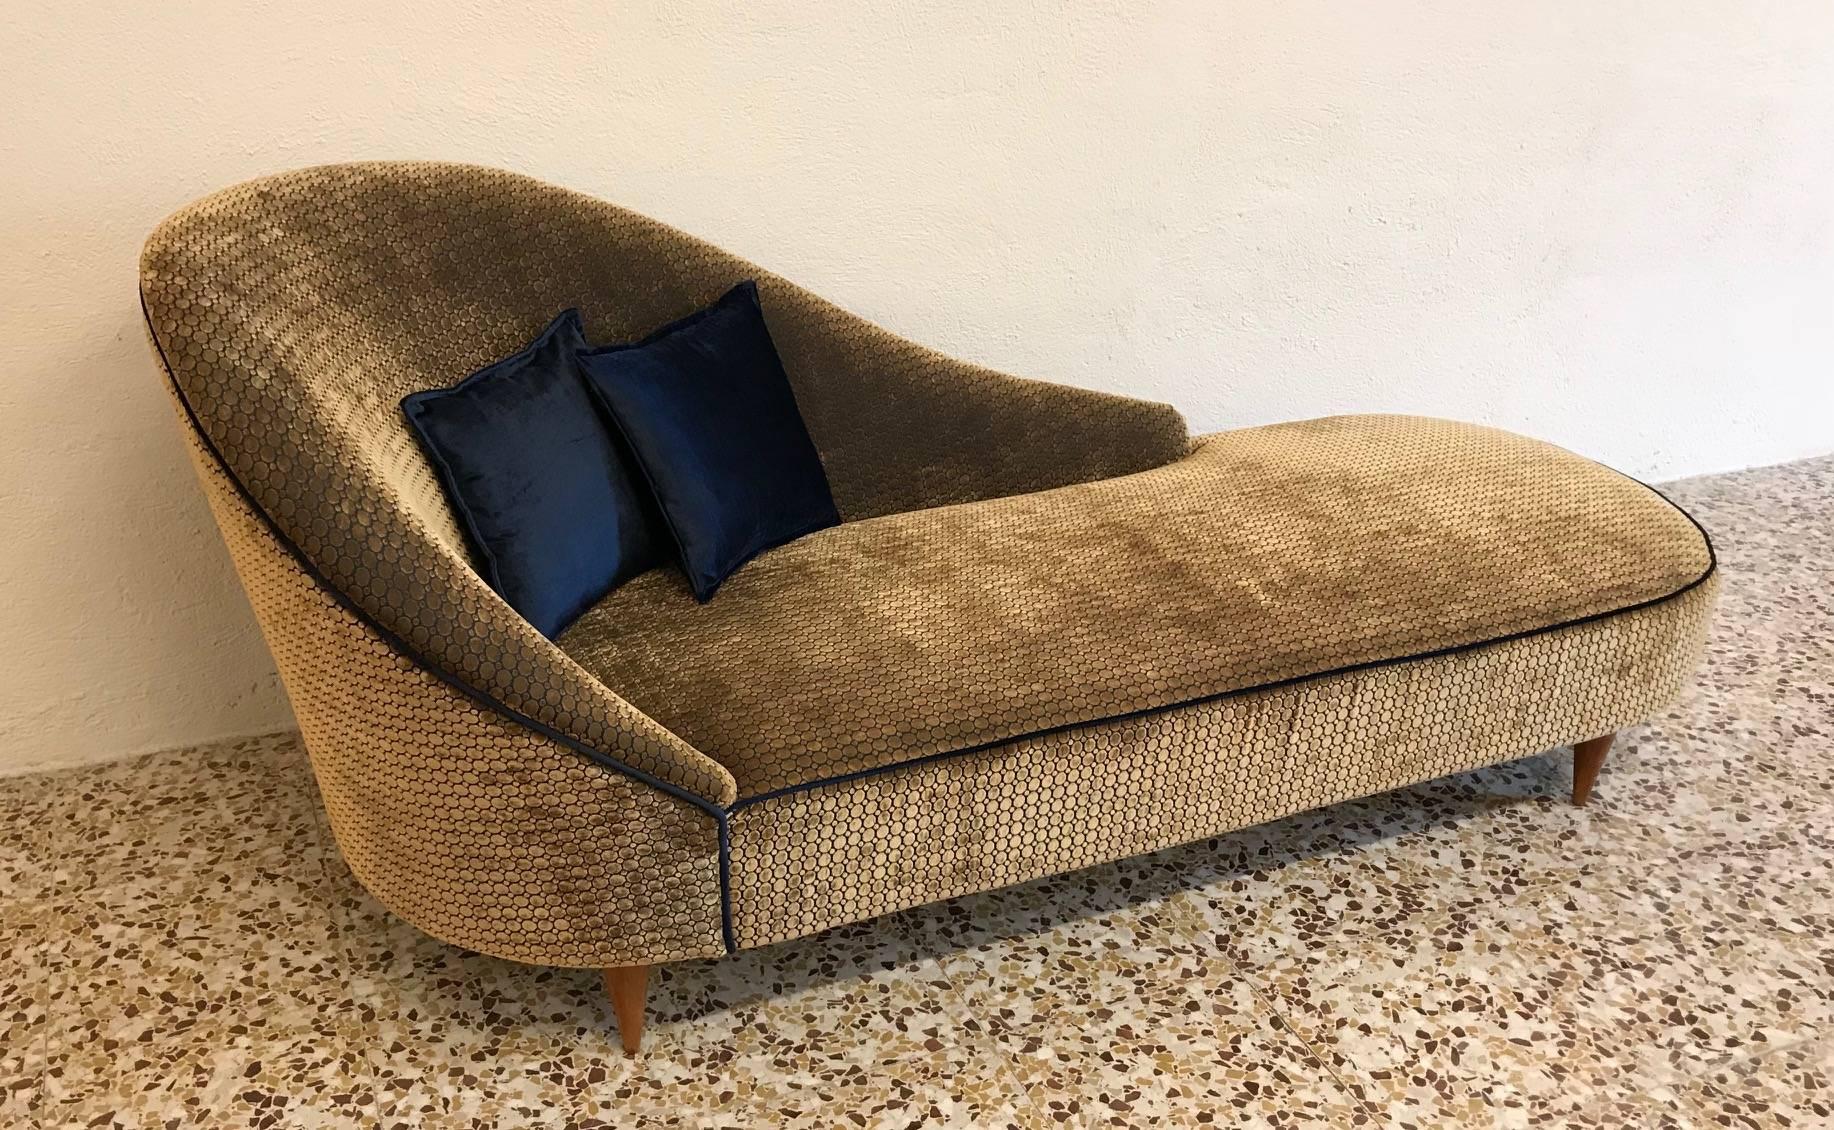 This Italian 1950s chaise longue has been restuffed and upholstered in high quality Italian velvet.
The feet is made of maple.